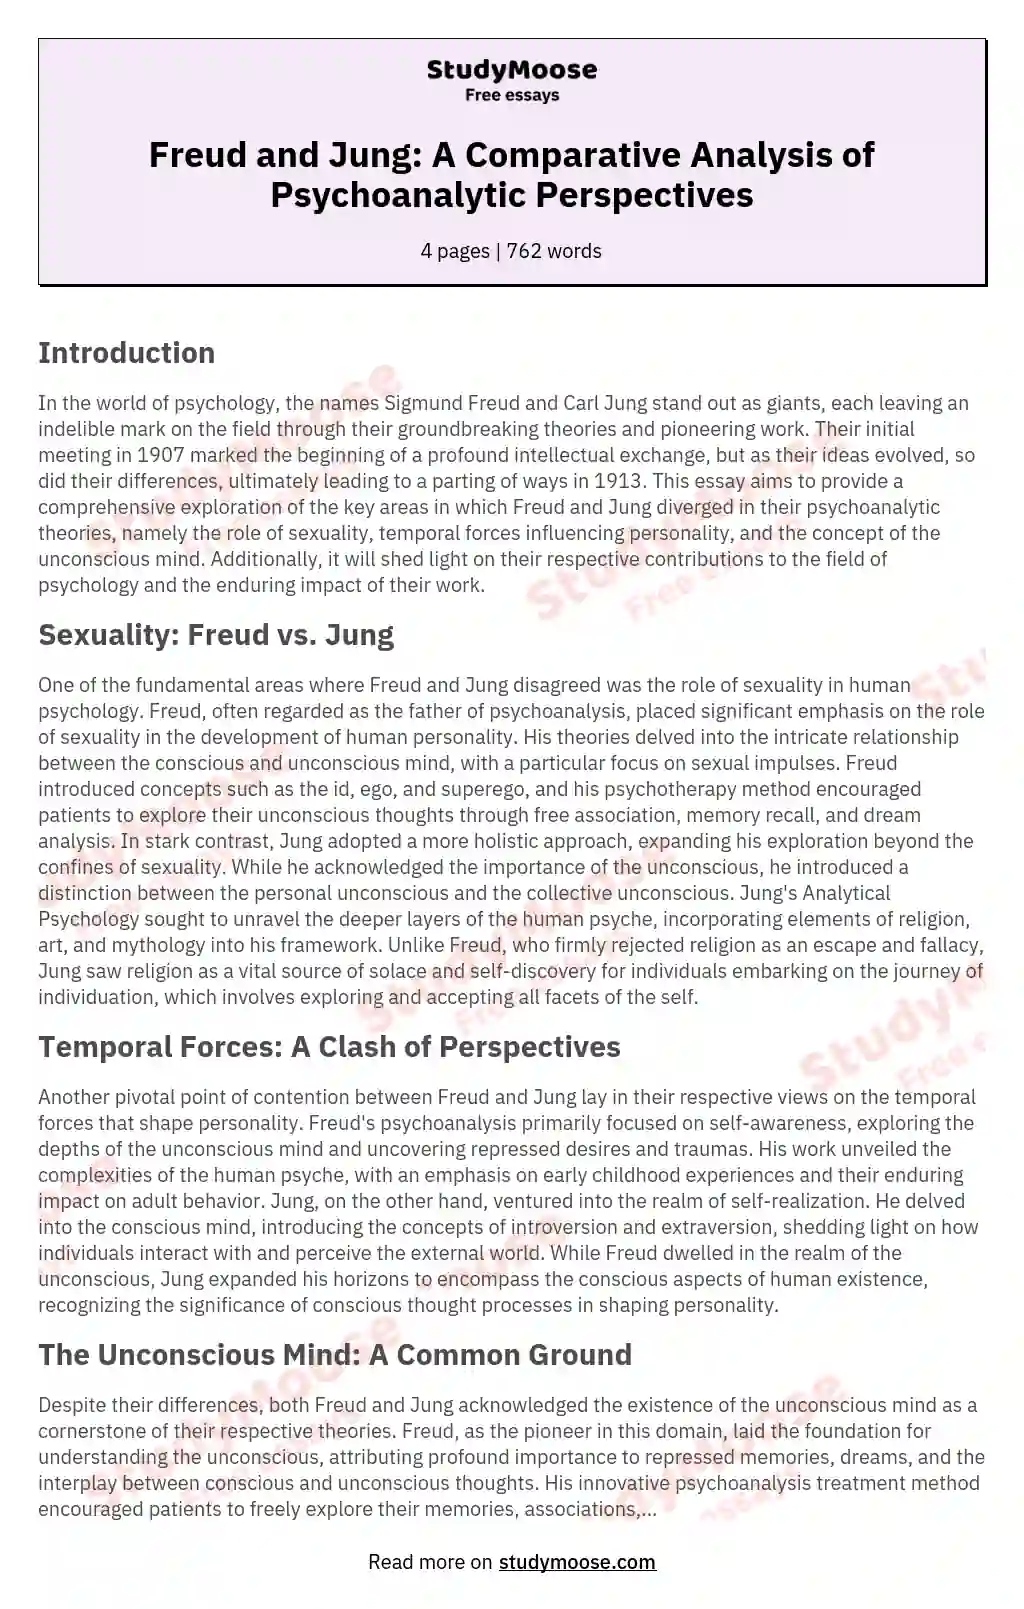 Freud and Jung: A Comparative Analysis of Psychoanalytic Perspectives essay